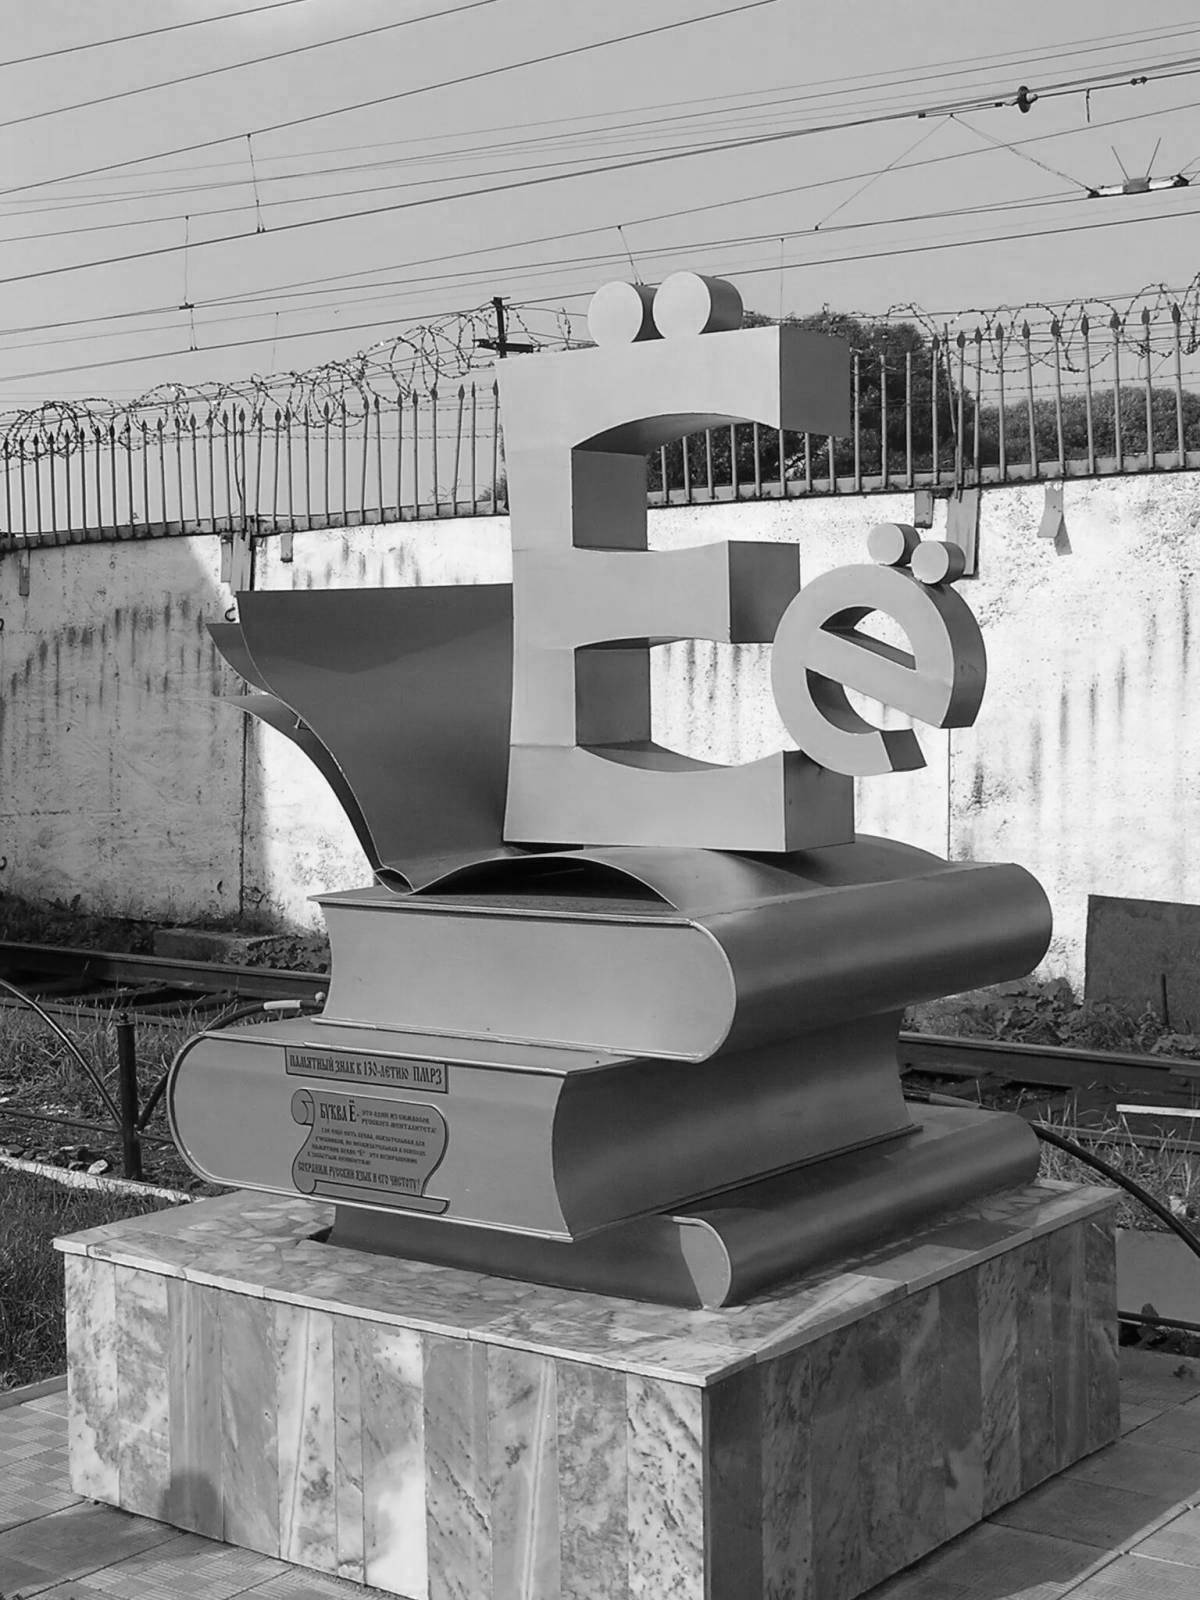 Coloring book bright monument to the letter e